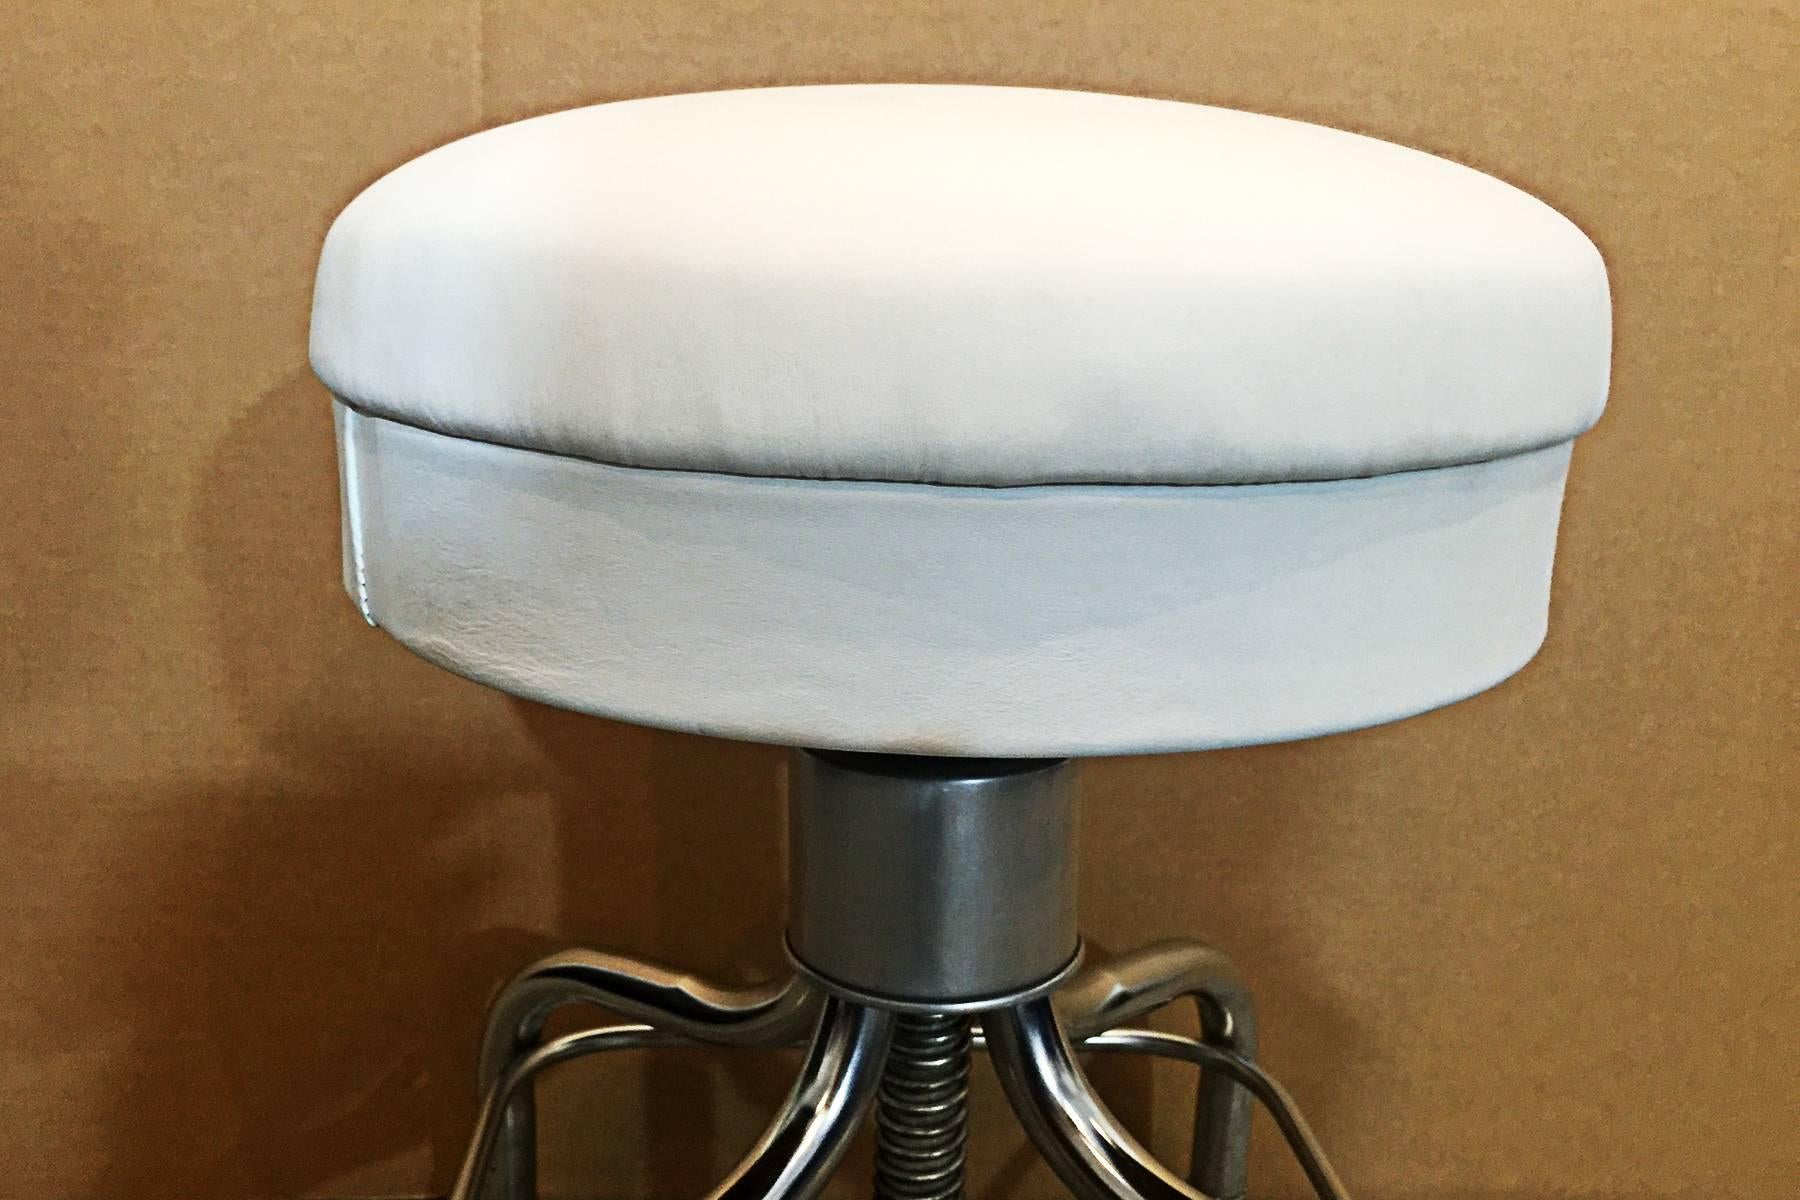 Pedigo brand chrome medical stool reupholstered in white leather. An American Classic for the home or office.

 Dimensions: 20.5